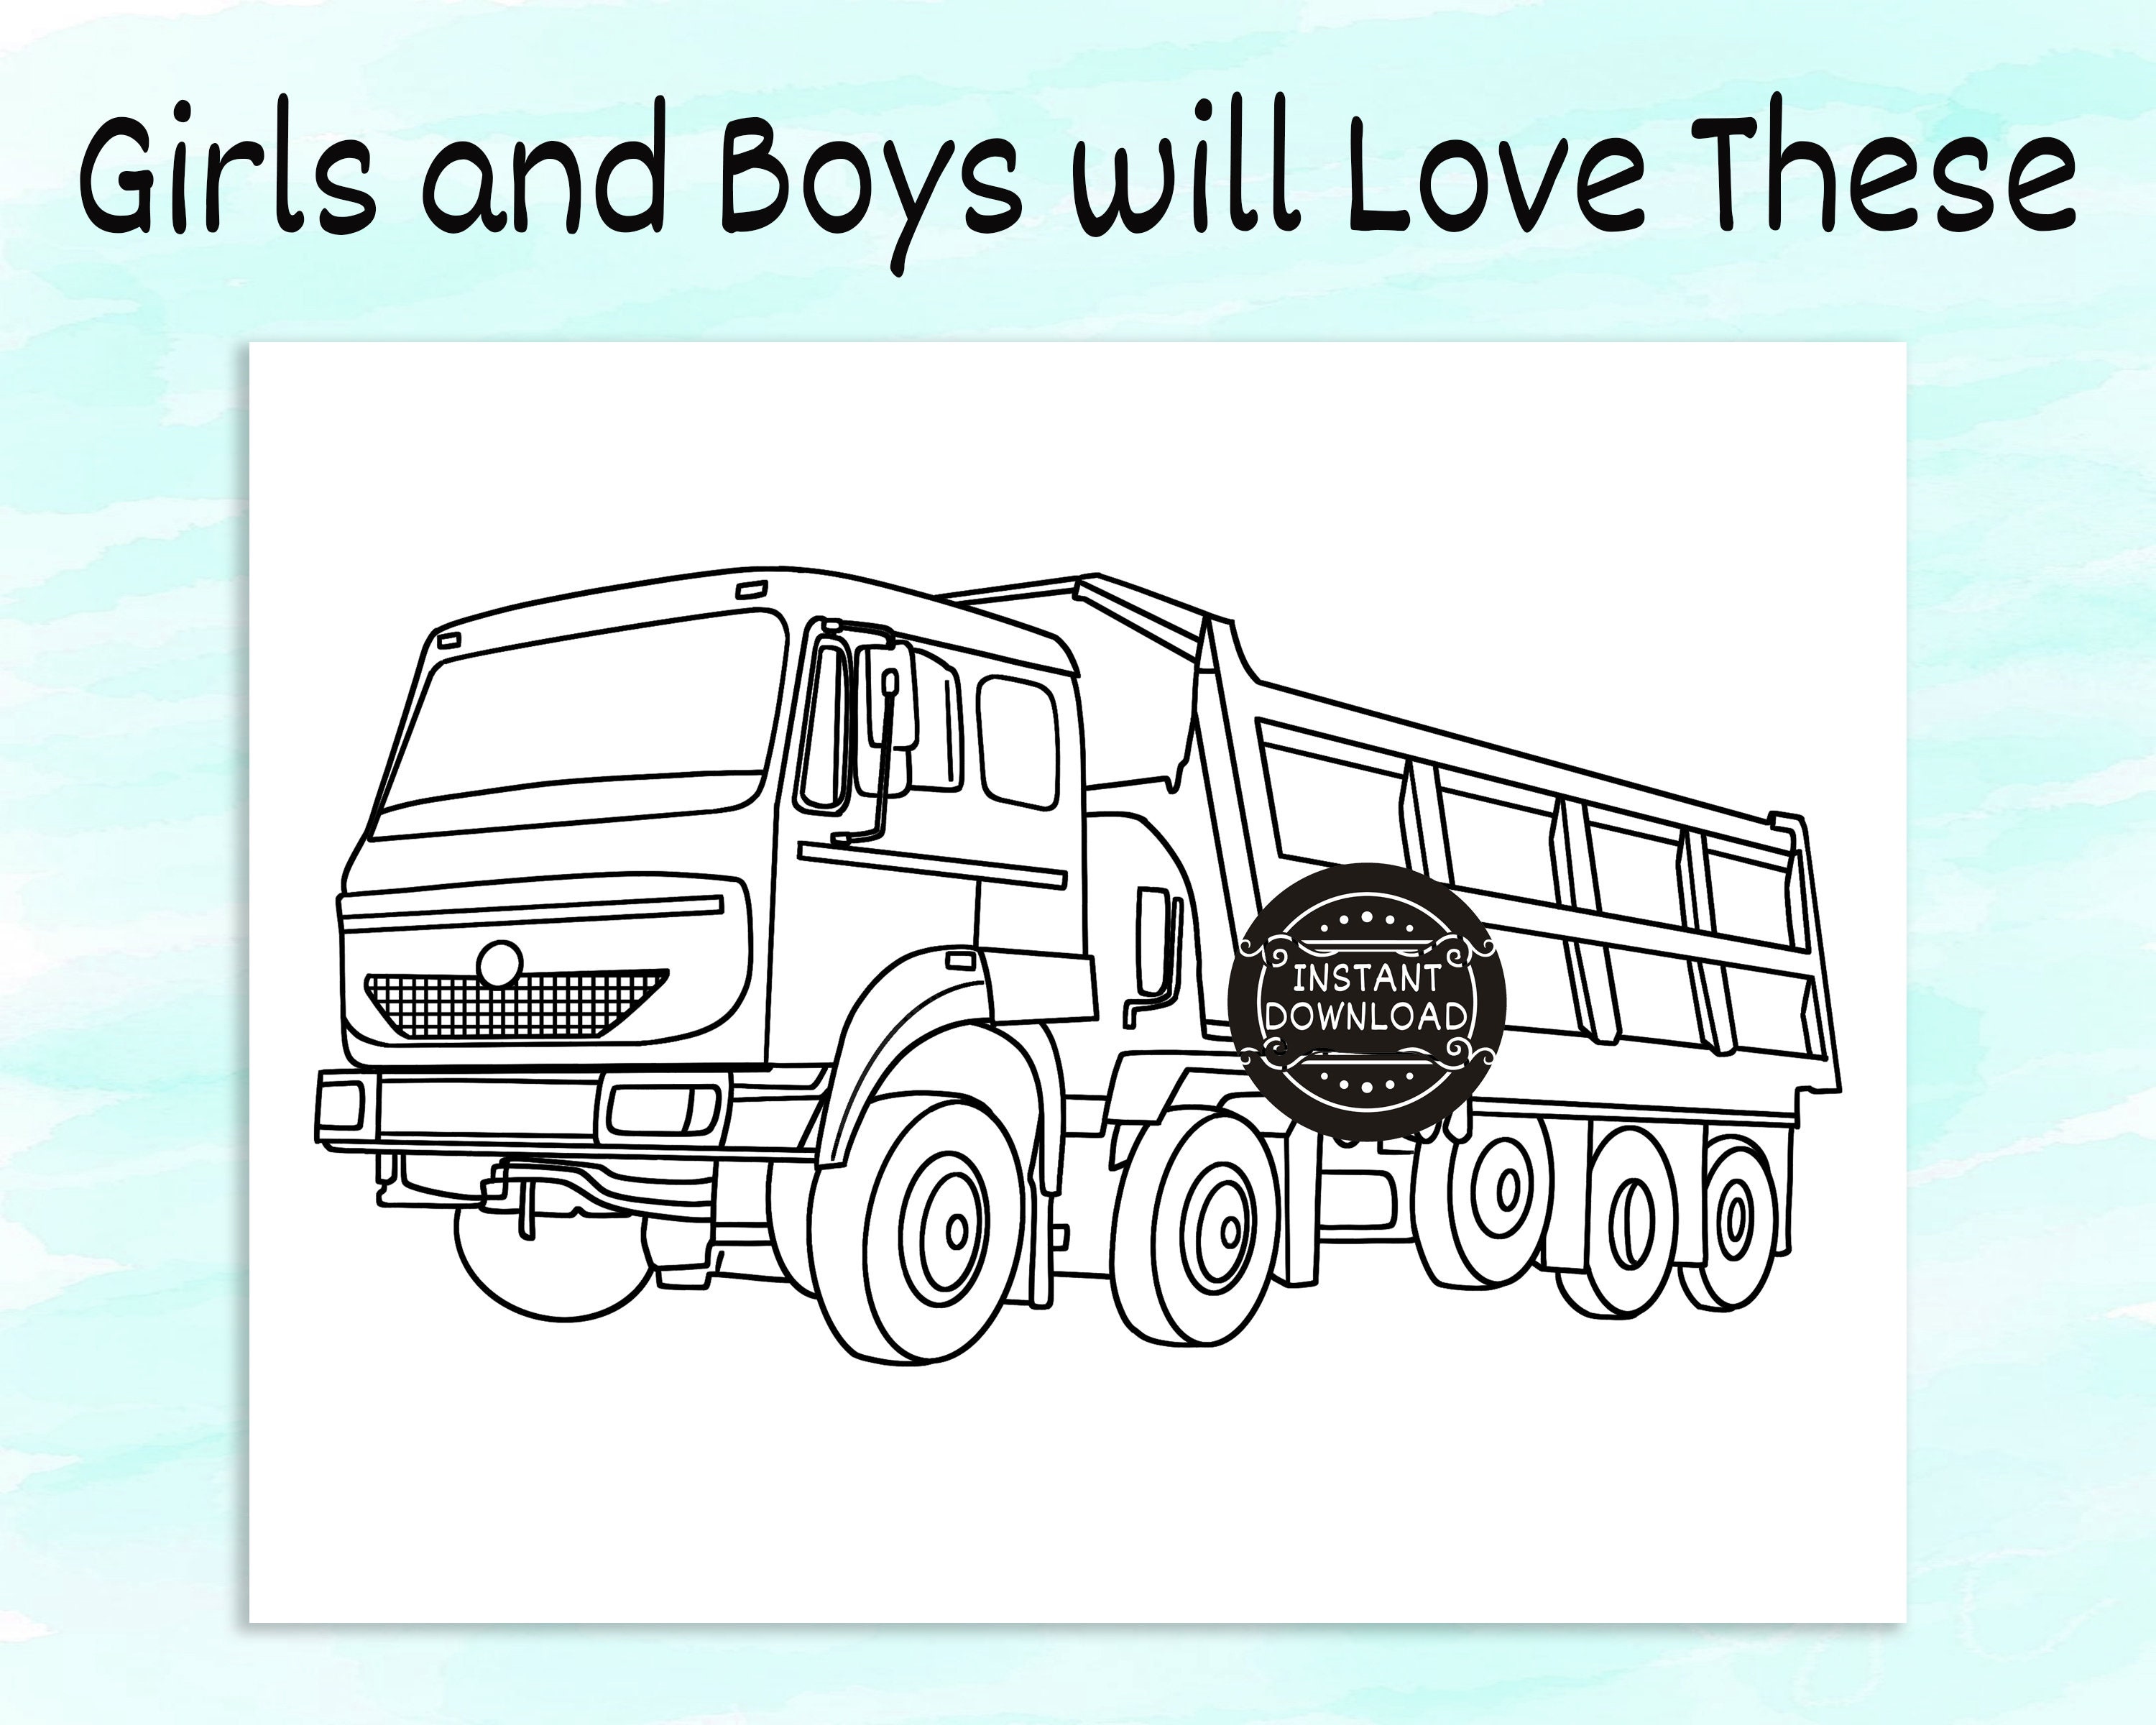 Boys Stuff: Coloring Book for Boys Ι Cute Cars, Trucks, Planes and